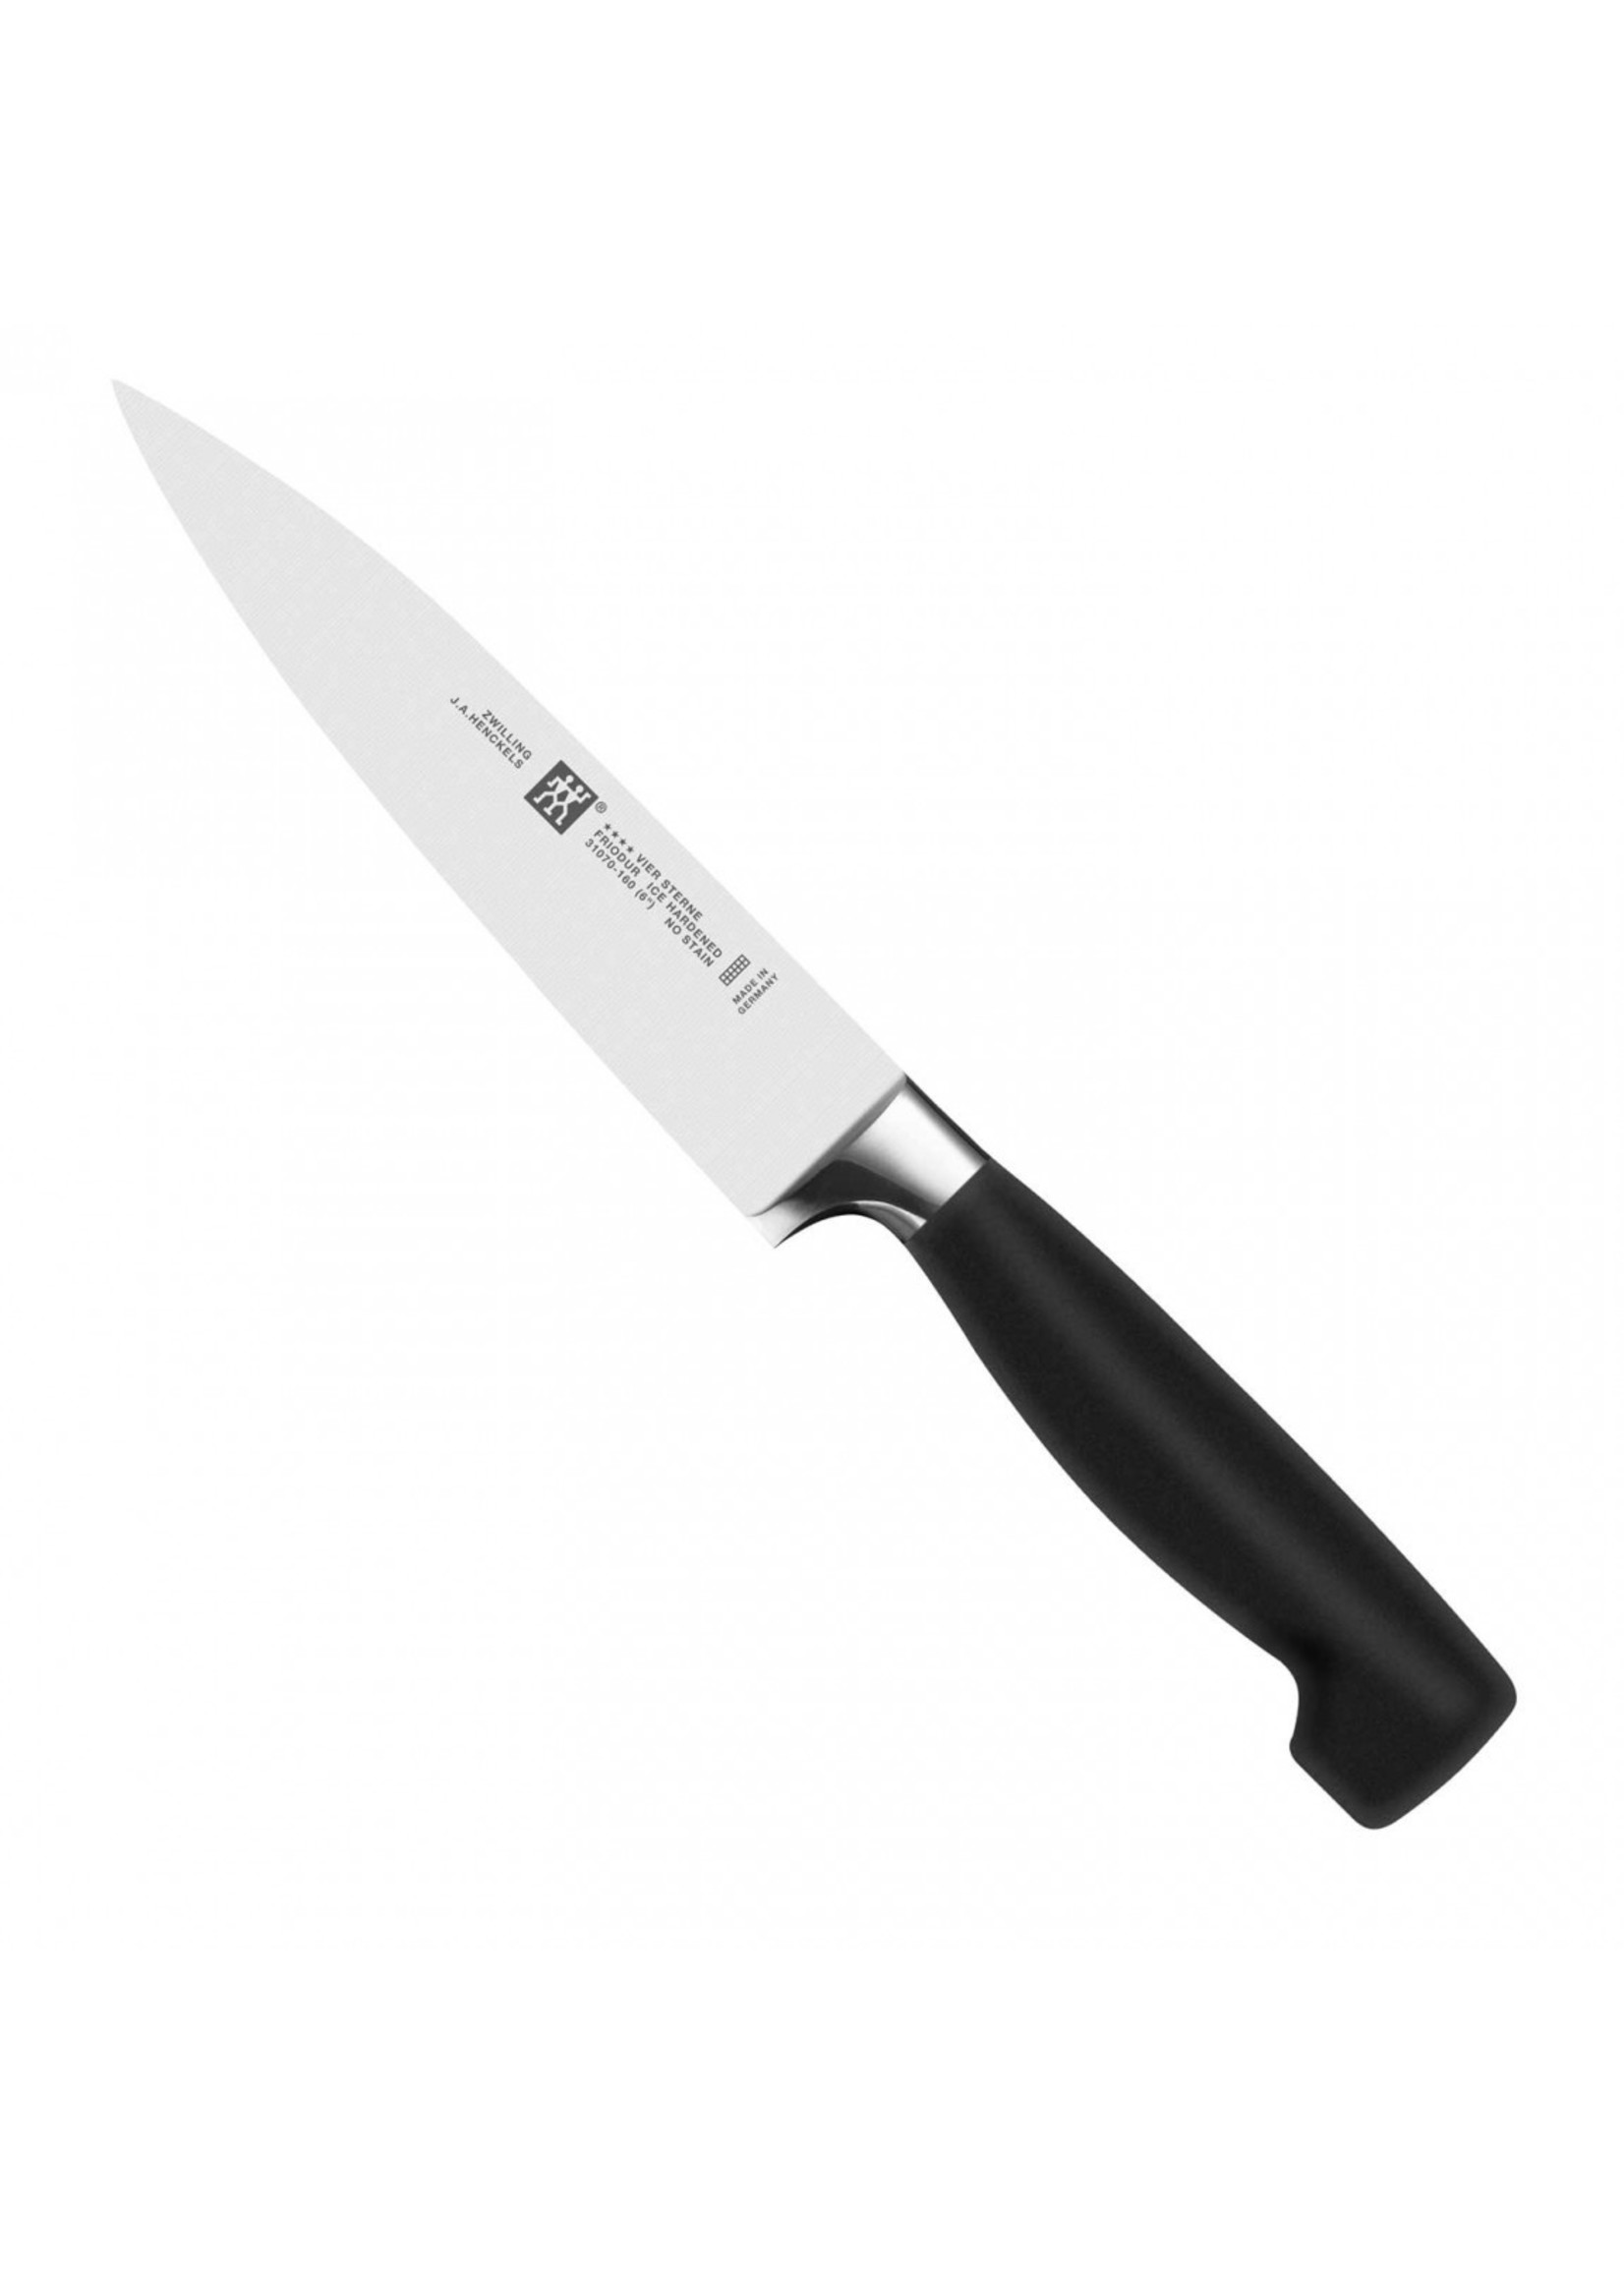 ZWILLING J.A. HENCKELS 31070-161 FSTAR COUTEAU UTILITAIRE 6"